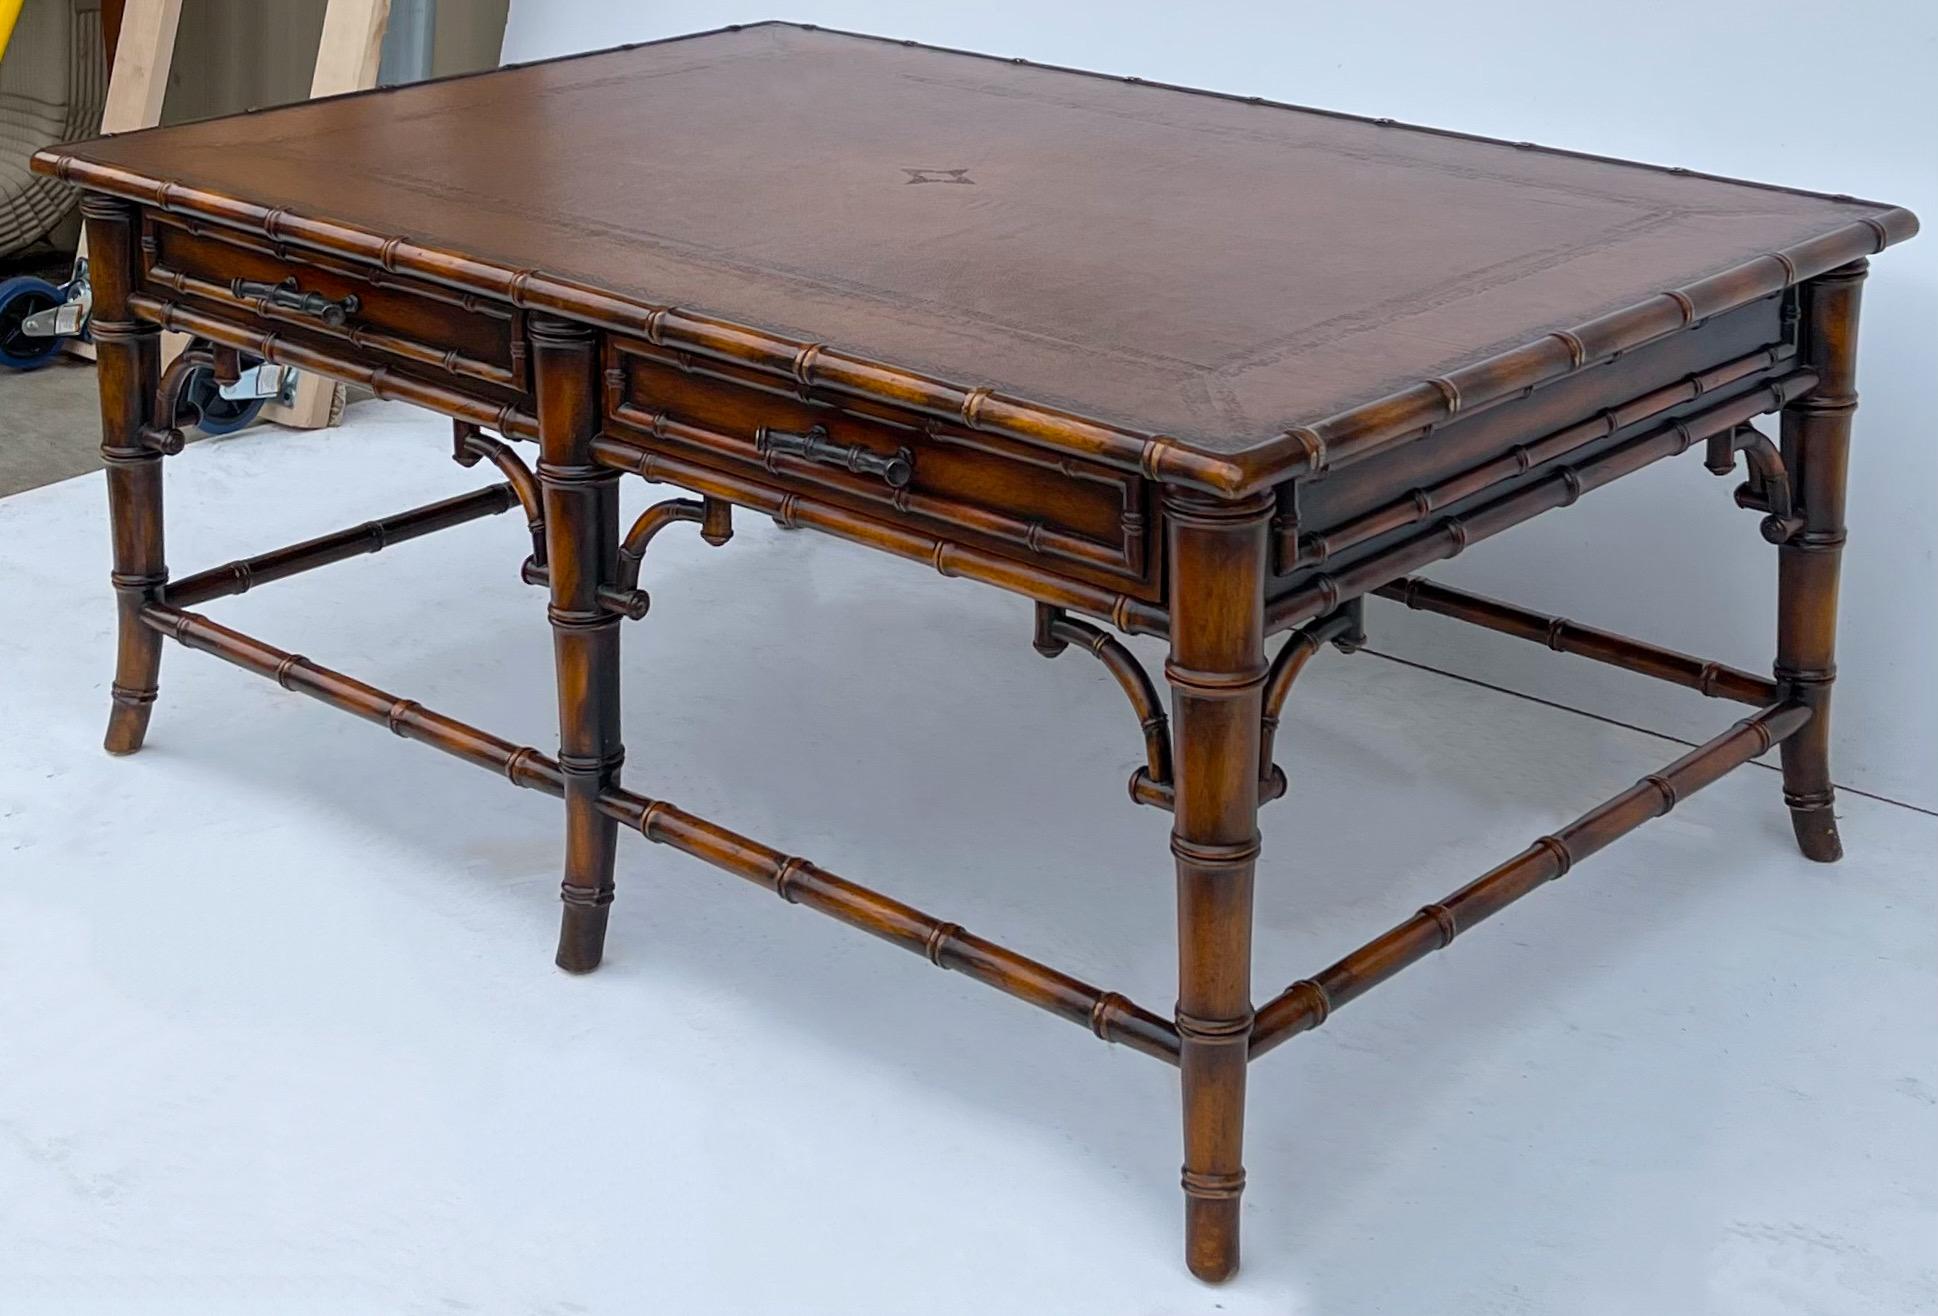 This is a Theodore Alexander Chinese chippendale style faux bamboo coffee table with tooled leather top. One of the sides has functioning drawers, and the other side has faux drawers, but identical in appearance. It is in very good condition.